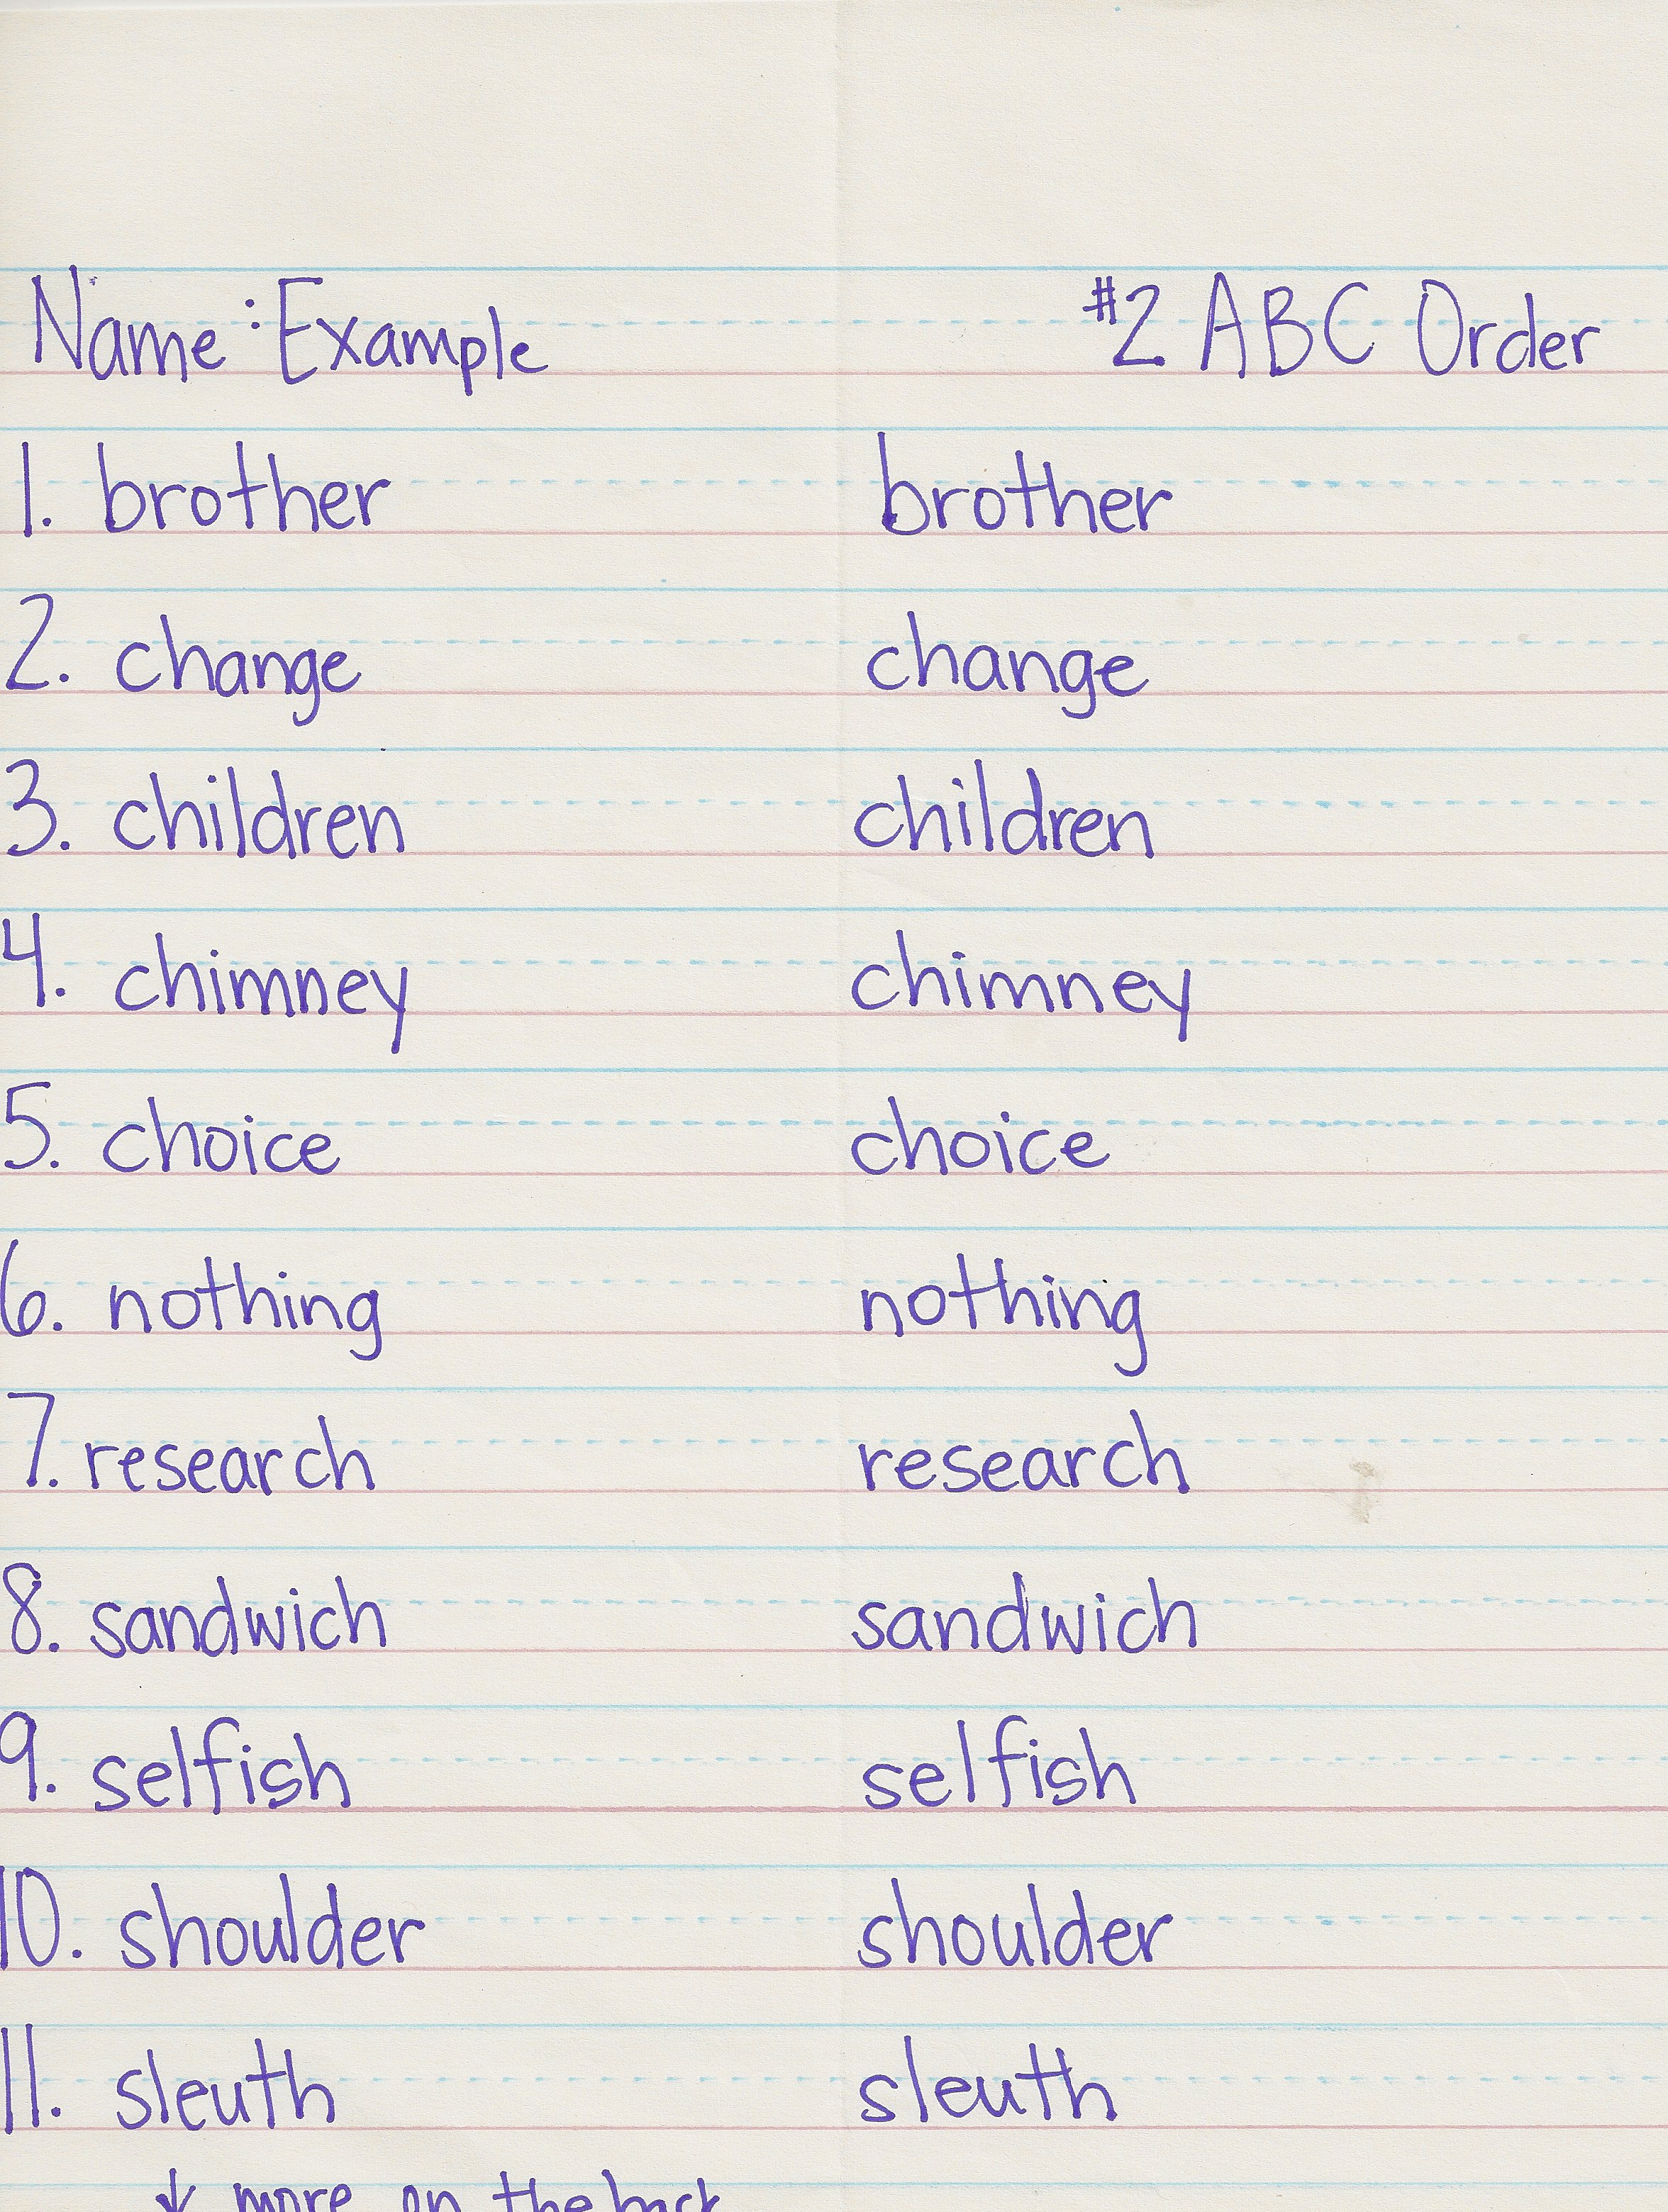 calam-o-words-in-alphabetical-order